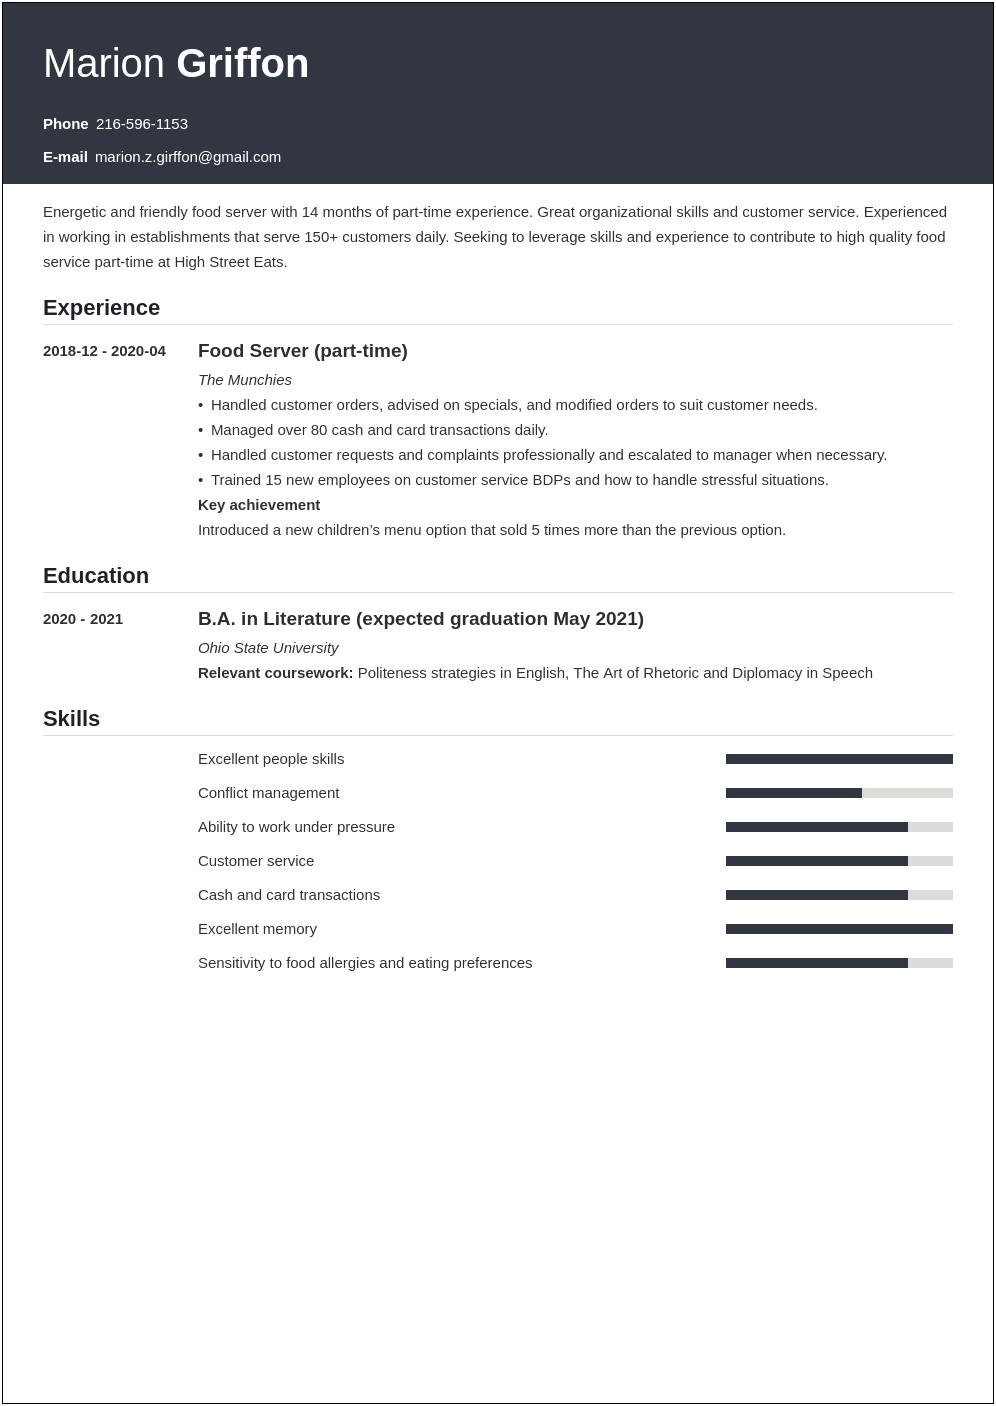 Education Part Of A Job Resume